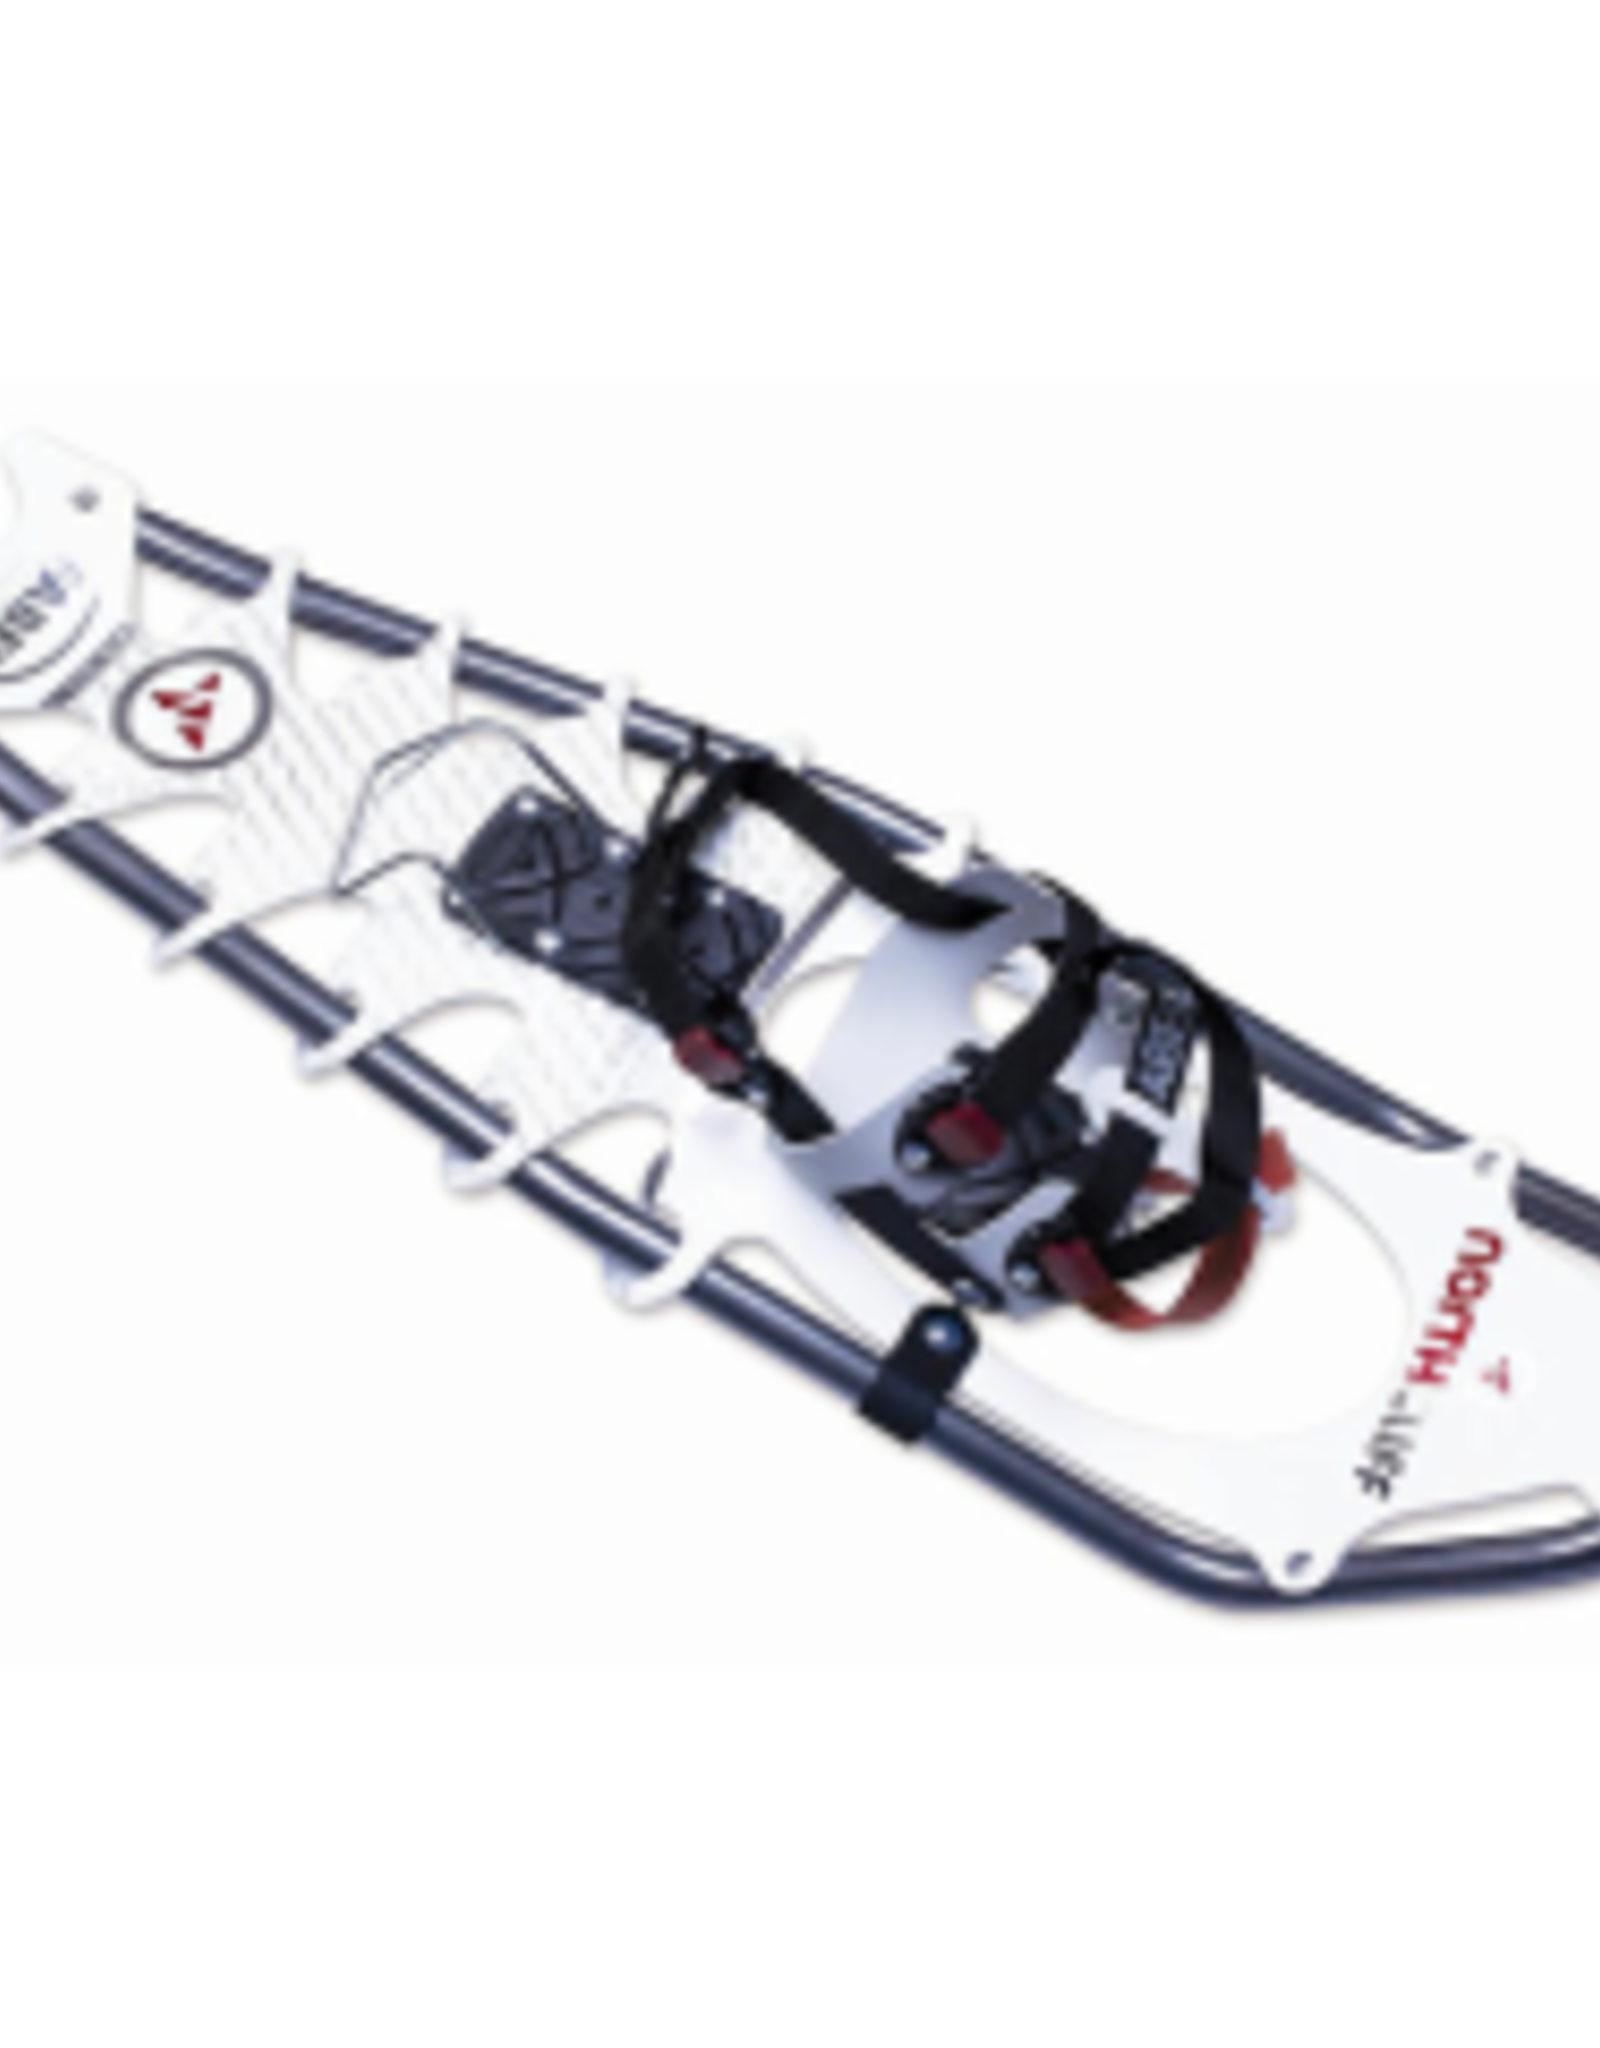 Faber Raquettes North Cliff 8x25IN Snowshoes (FA-NC825)